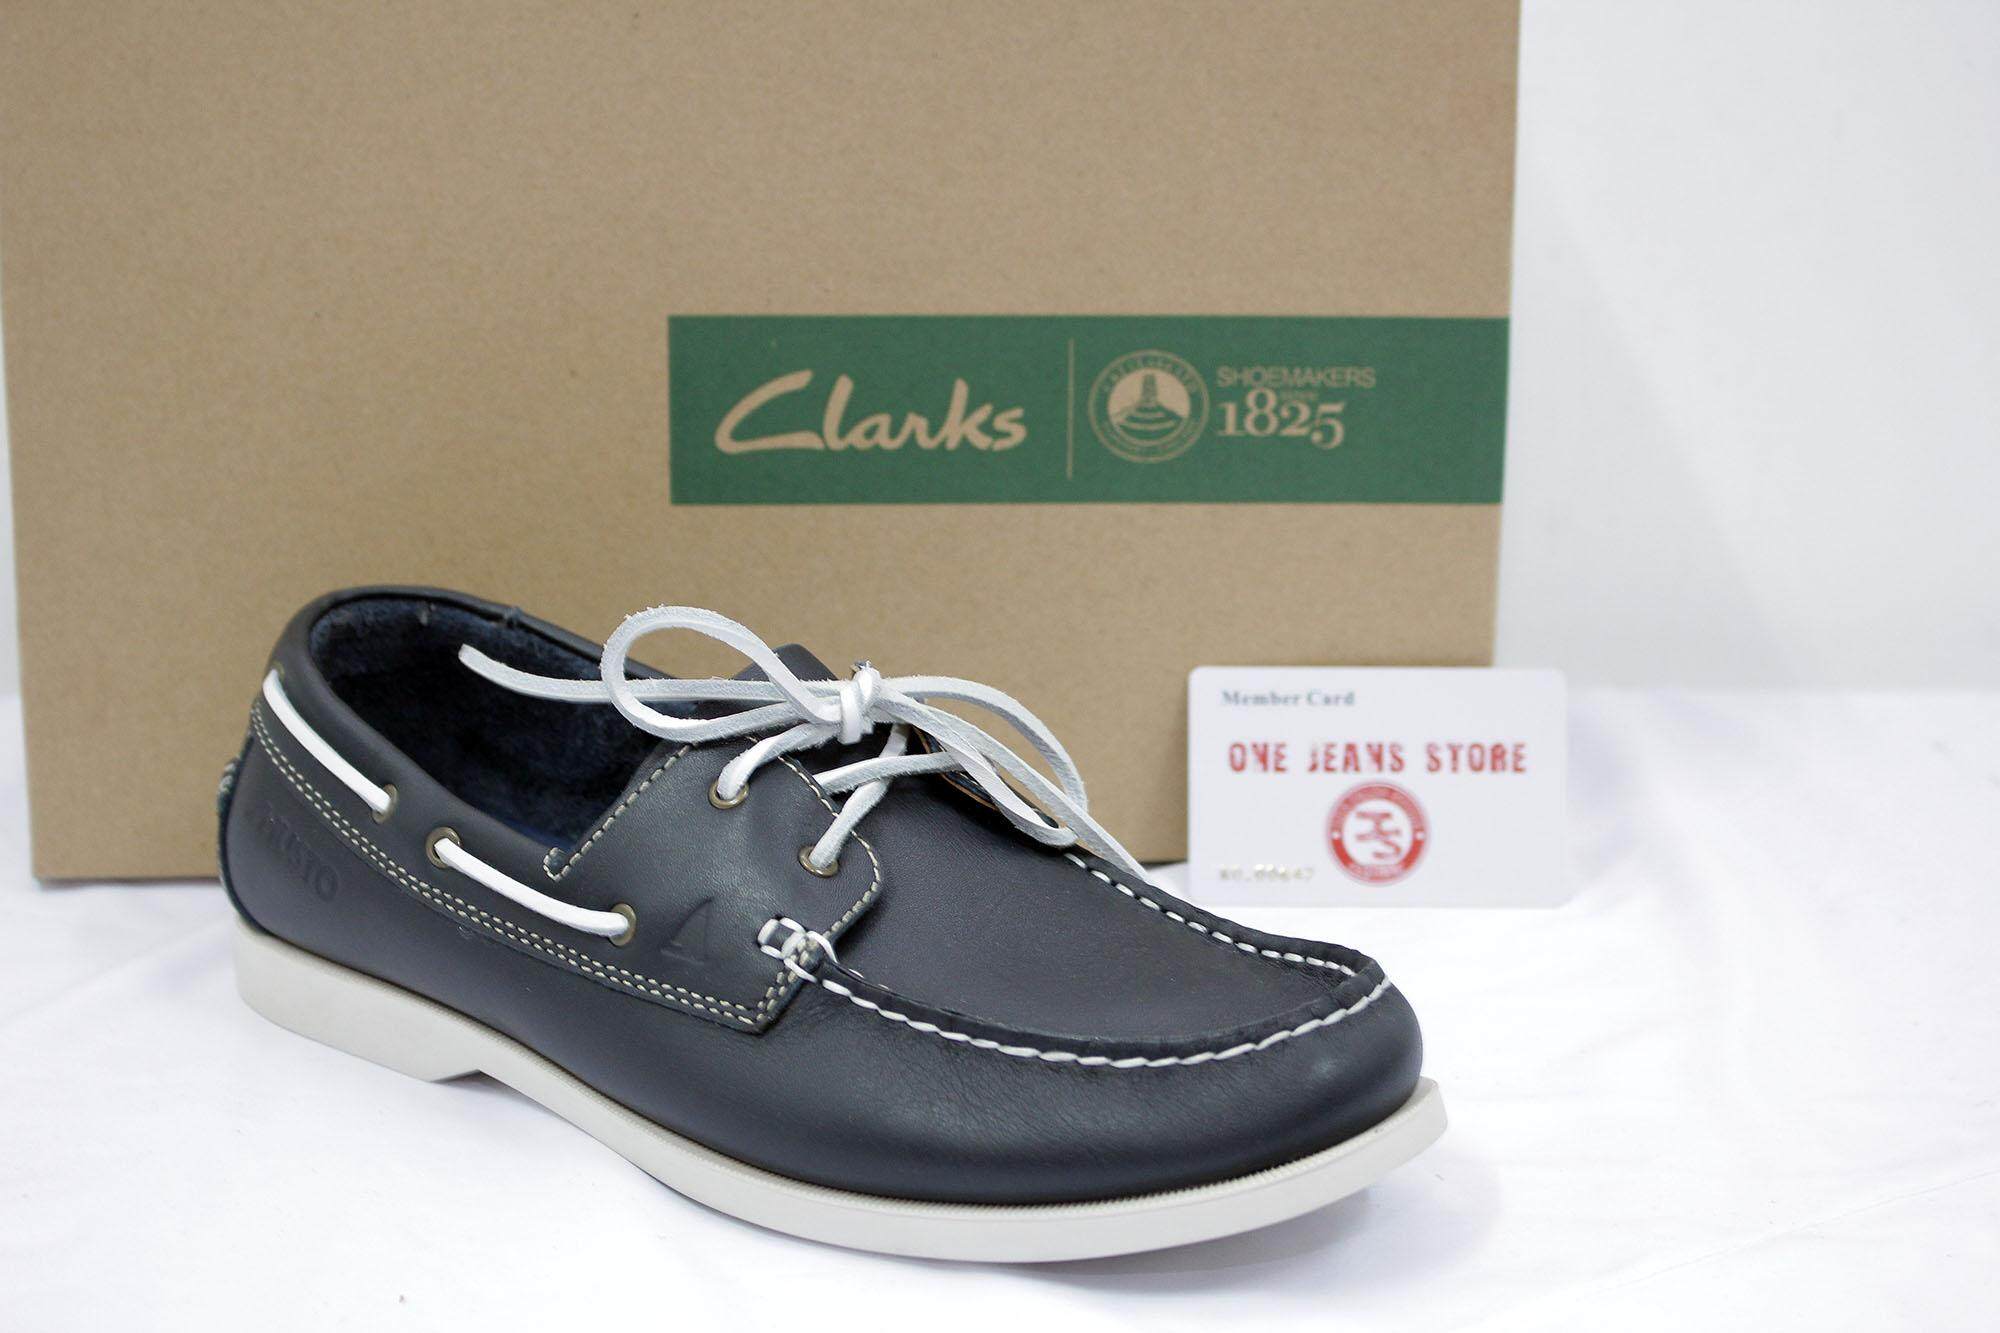 musto clarks shoes